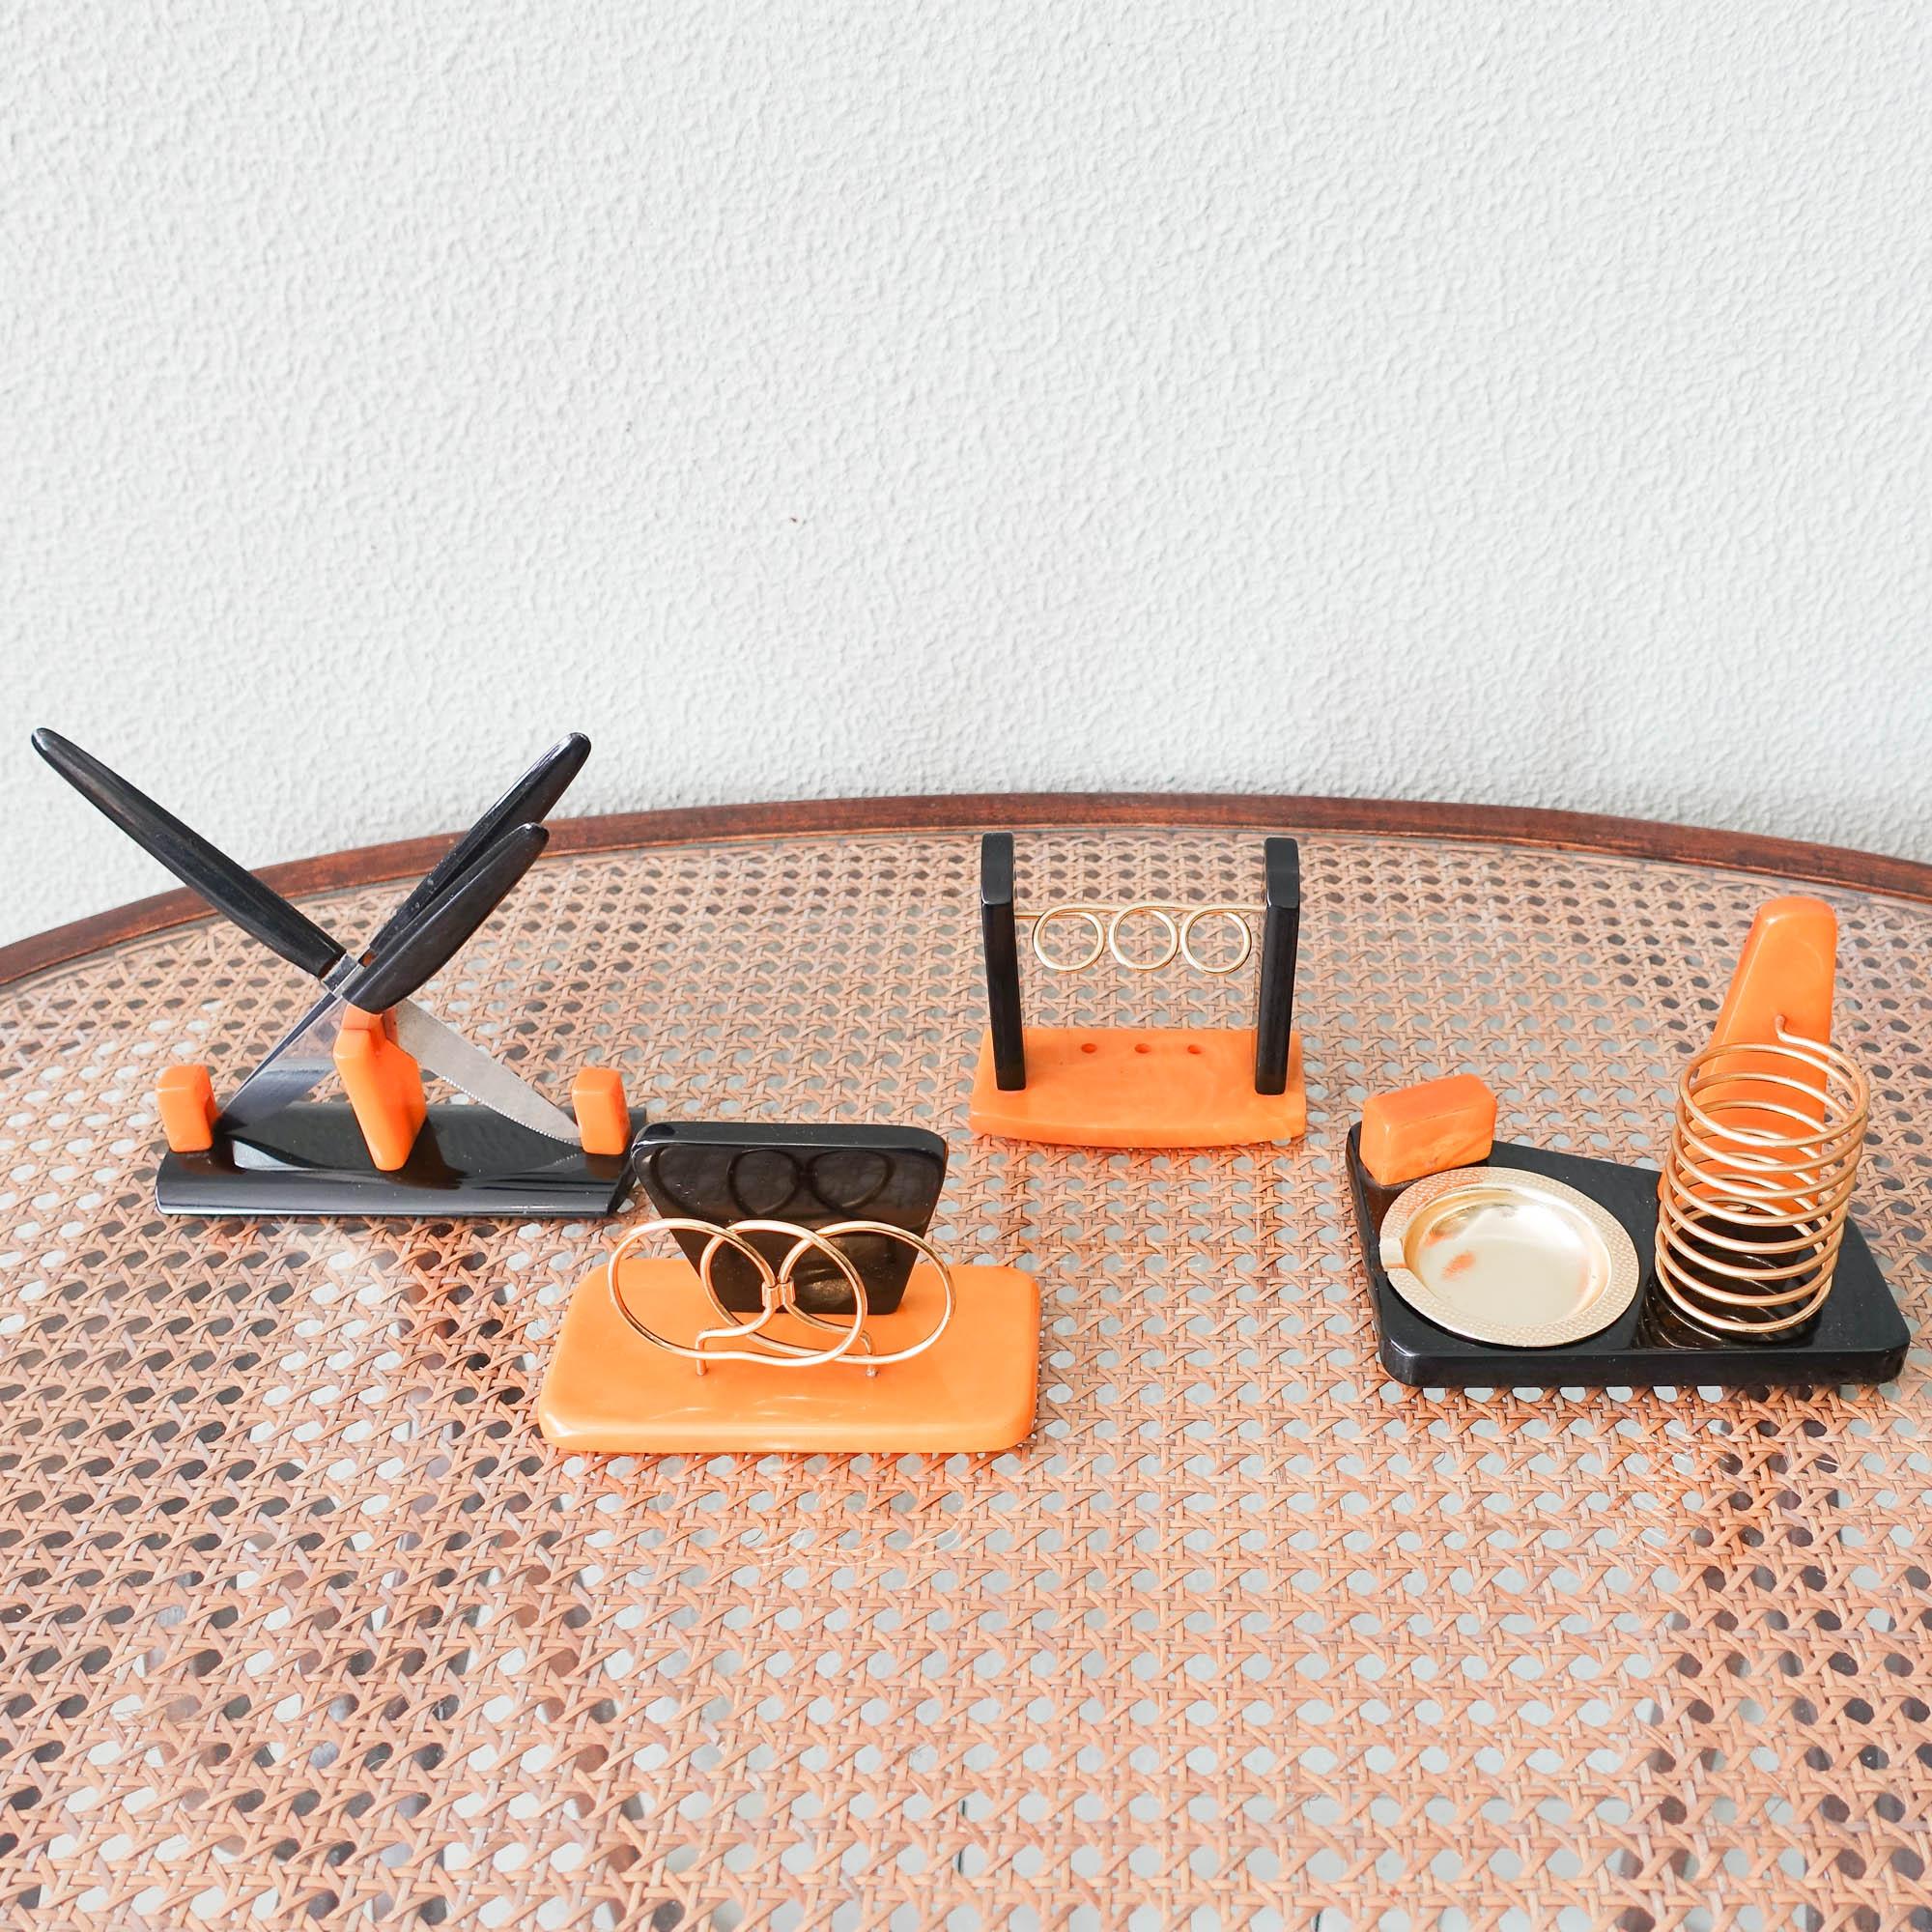 This rare desk set was designed and produced in Germany, during the 1940's. It consists on a knives holder, with three knives, a letter holder, an ashtray and cigarettes holder and a pen holder. All pieces are in bakelite amber honey shade and black